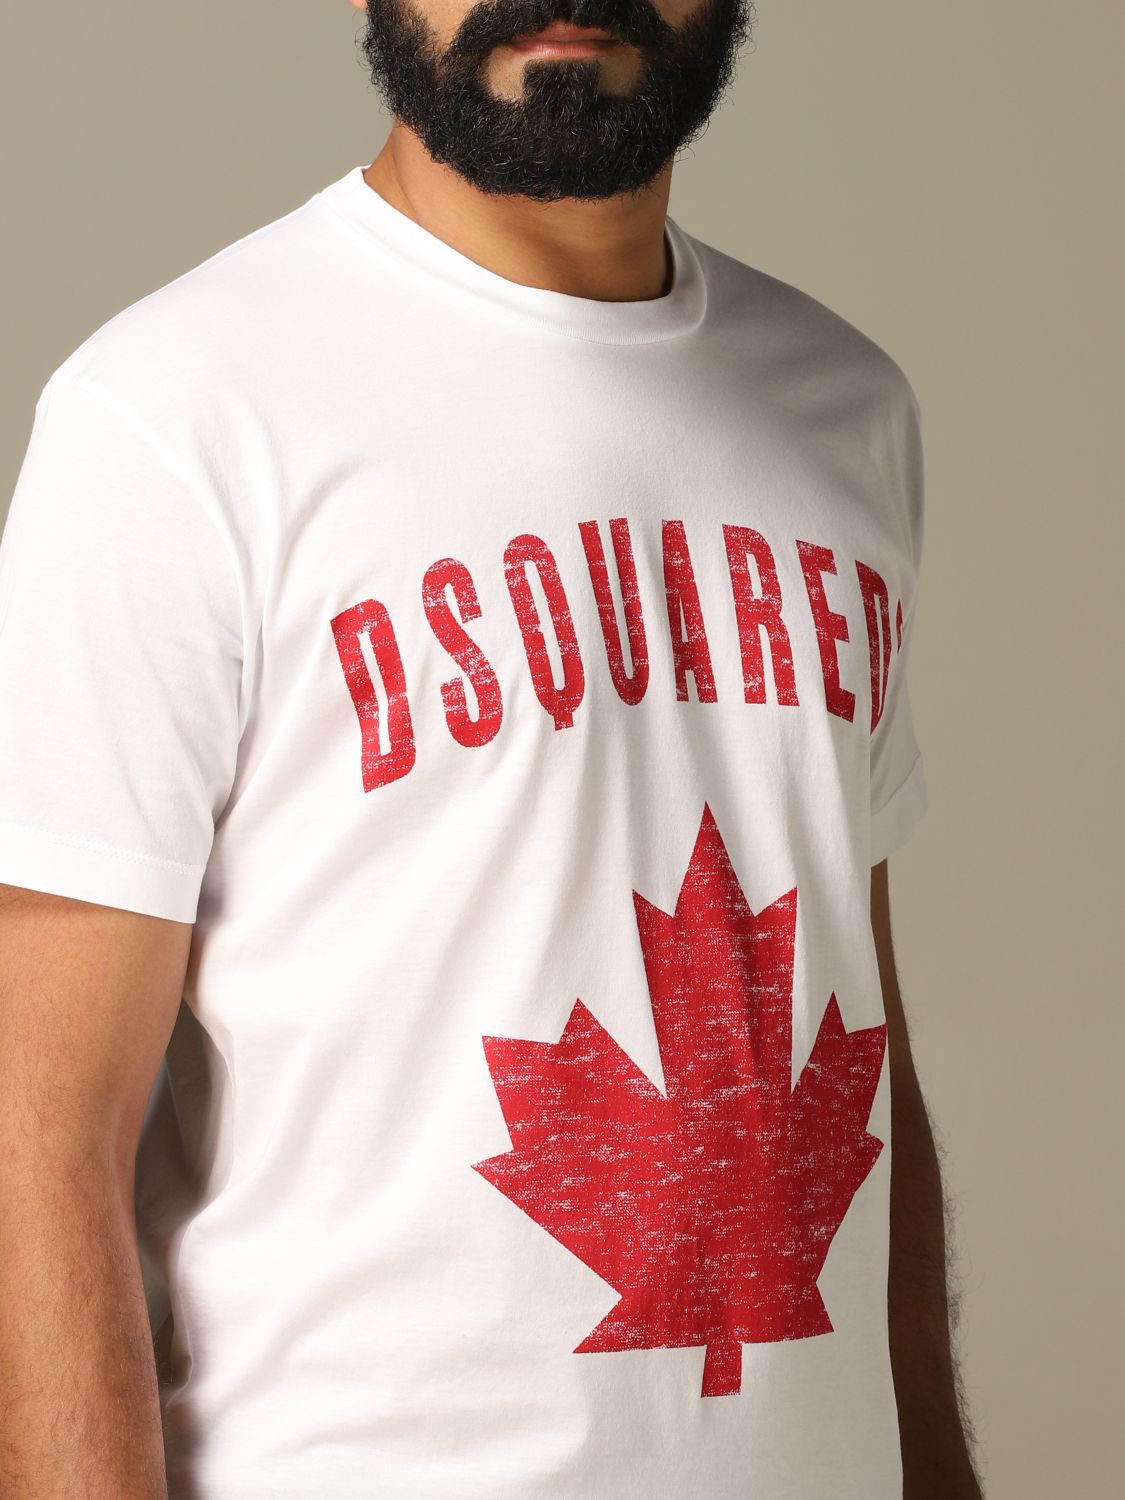 t shirt dsquared feuille